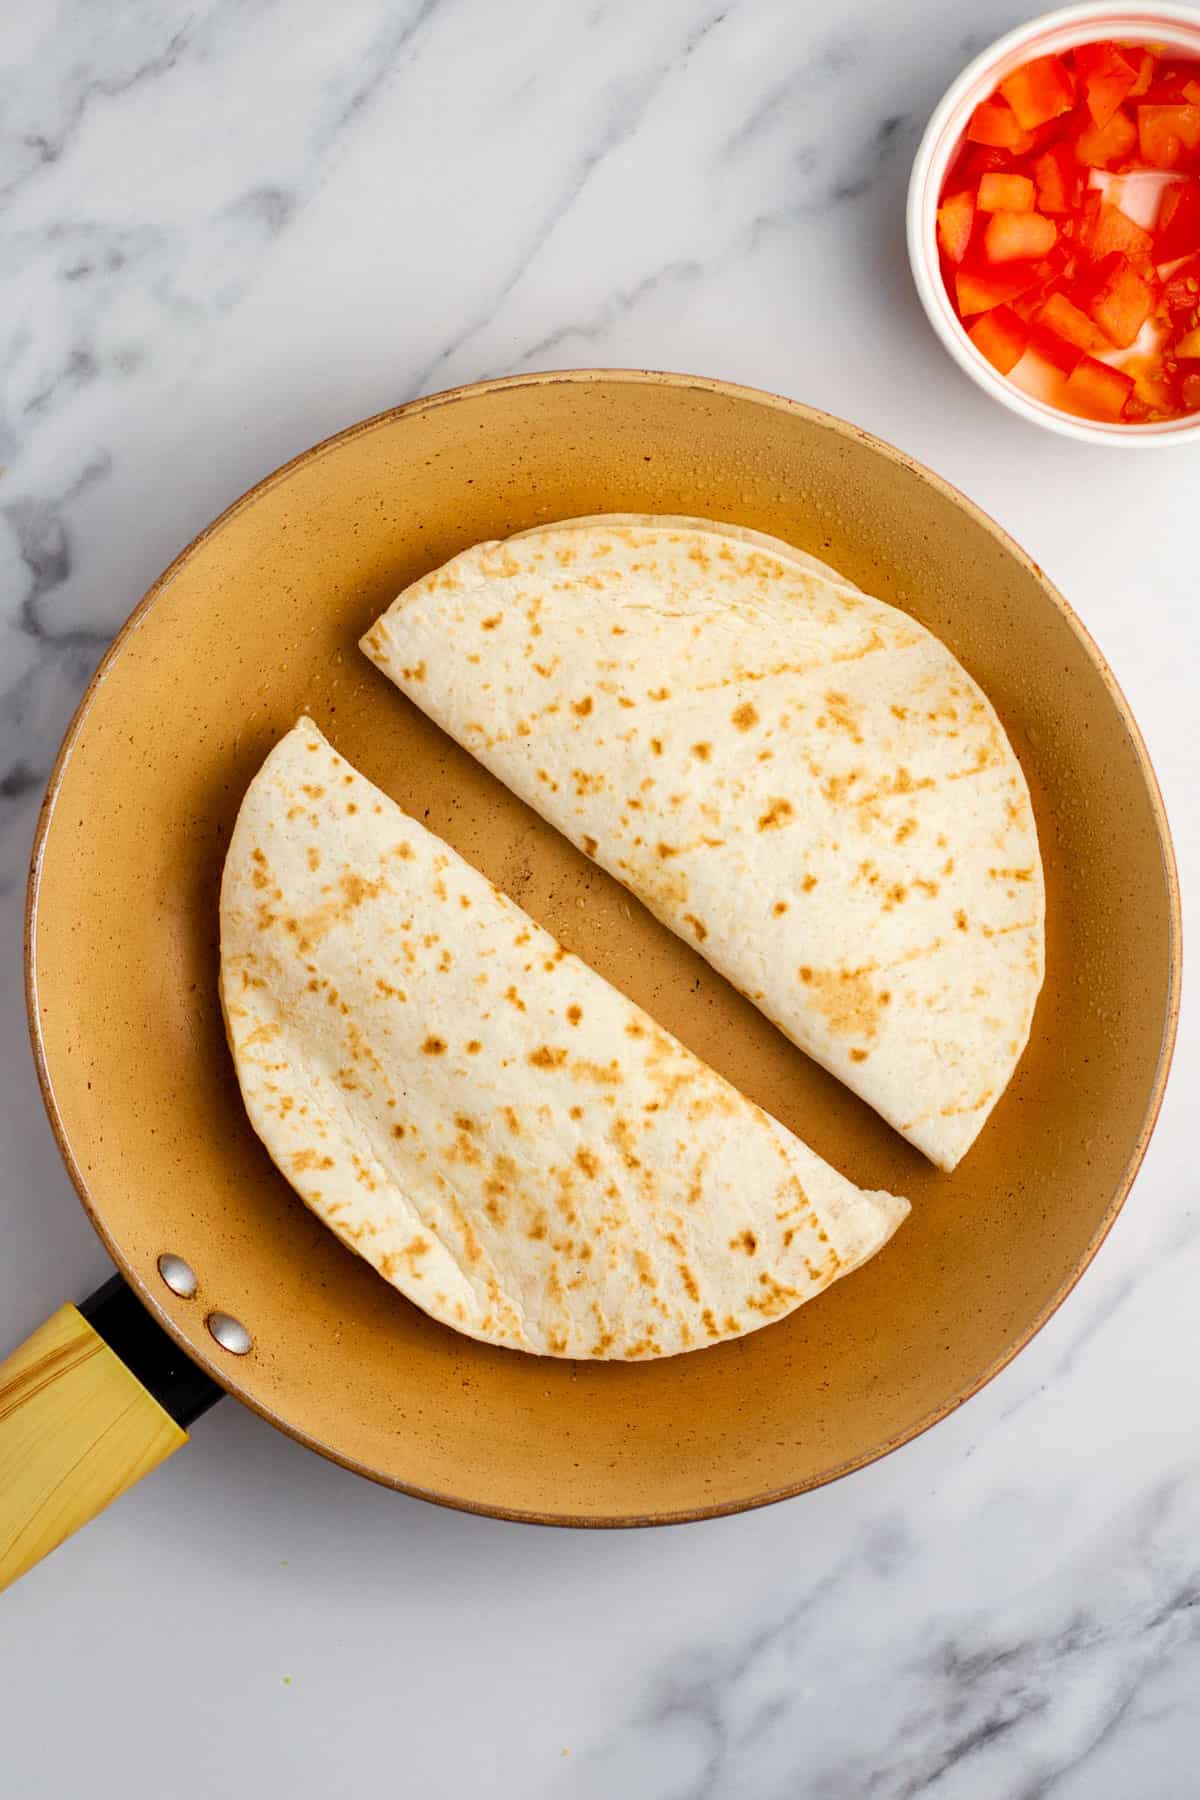 uncooked quesadilla on a frying pan